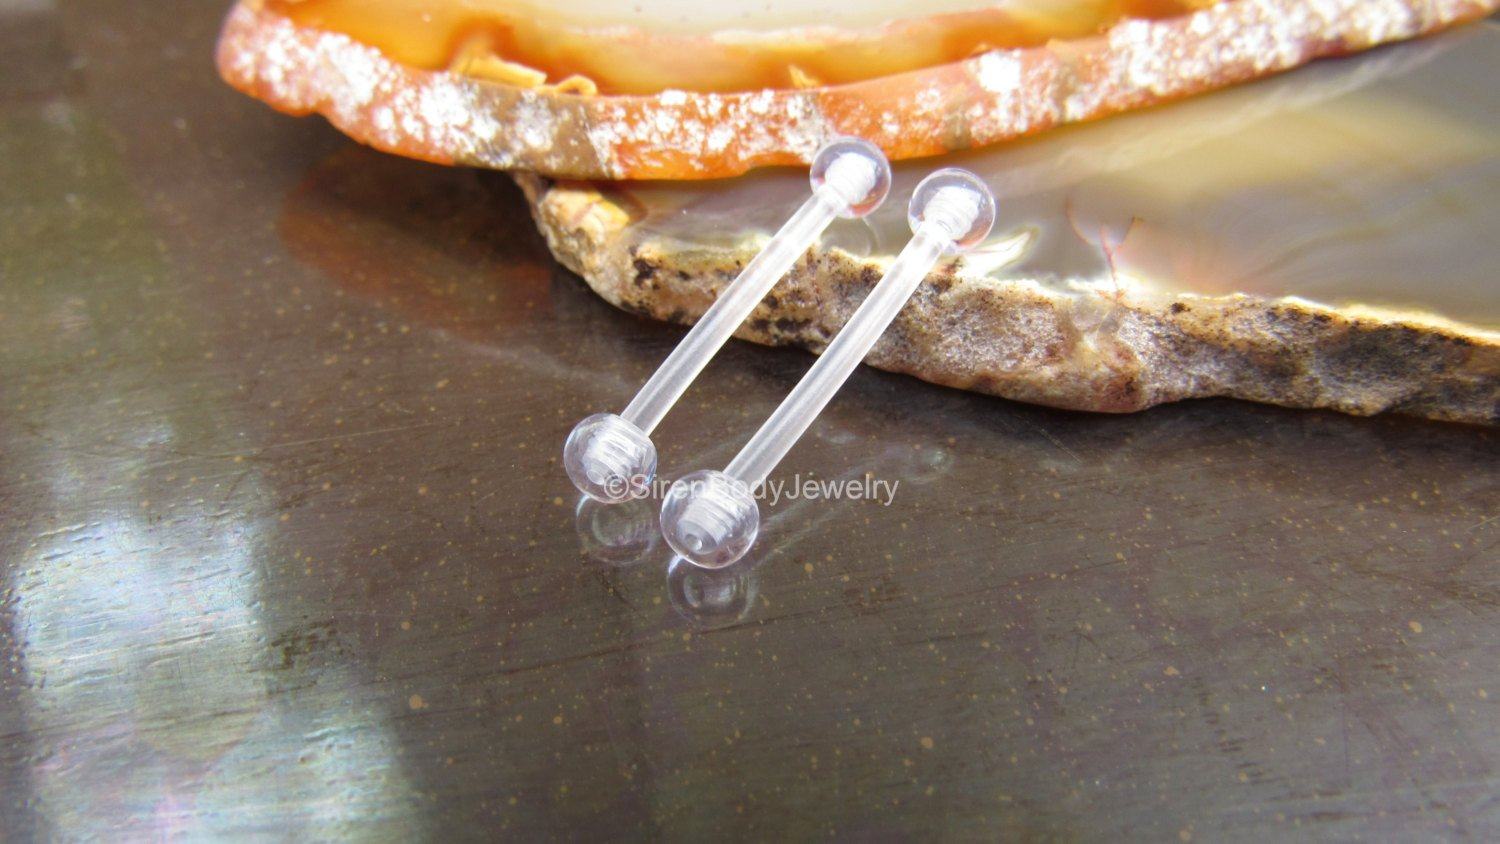 Nipple piercing retainer 14g clear tongue piercing ring 5/8" mri safe surgery piercings retainers body jewelry rings pair 1 - SirenBodyJewelry